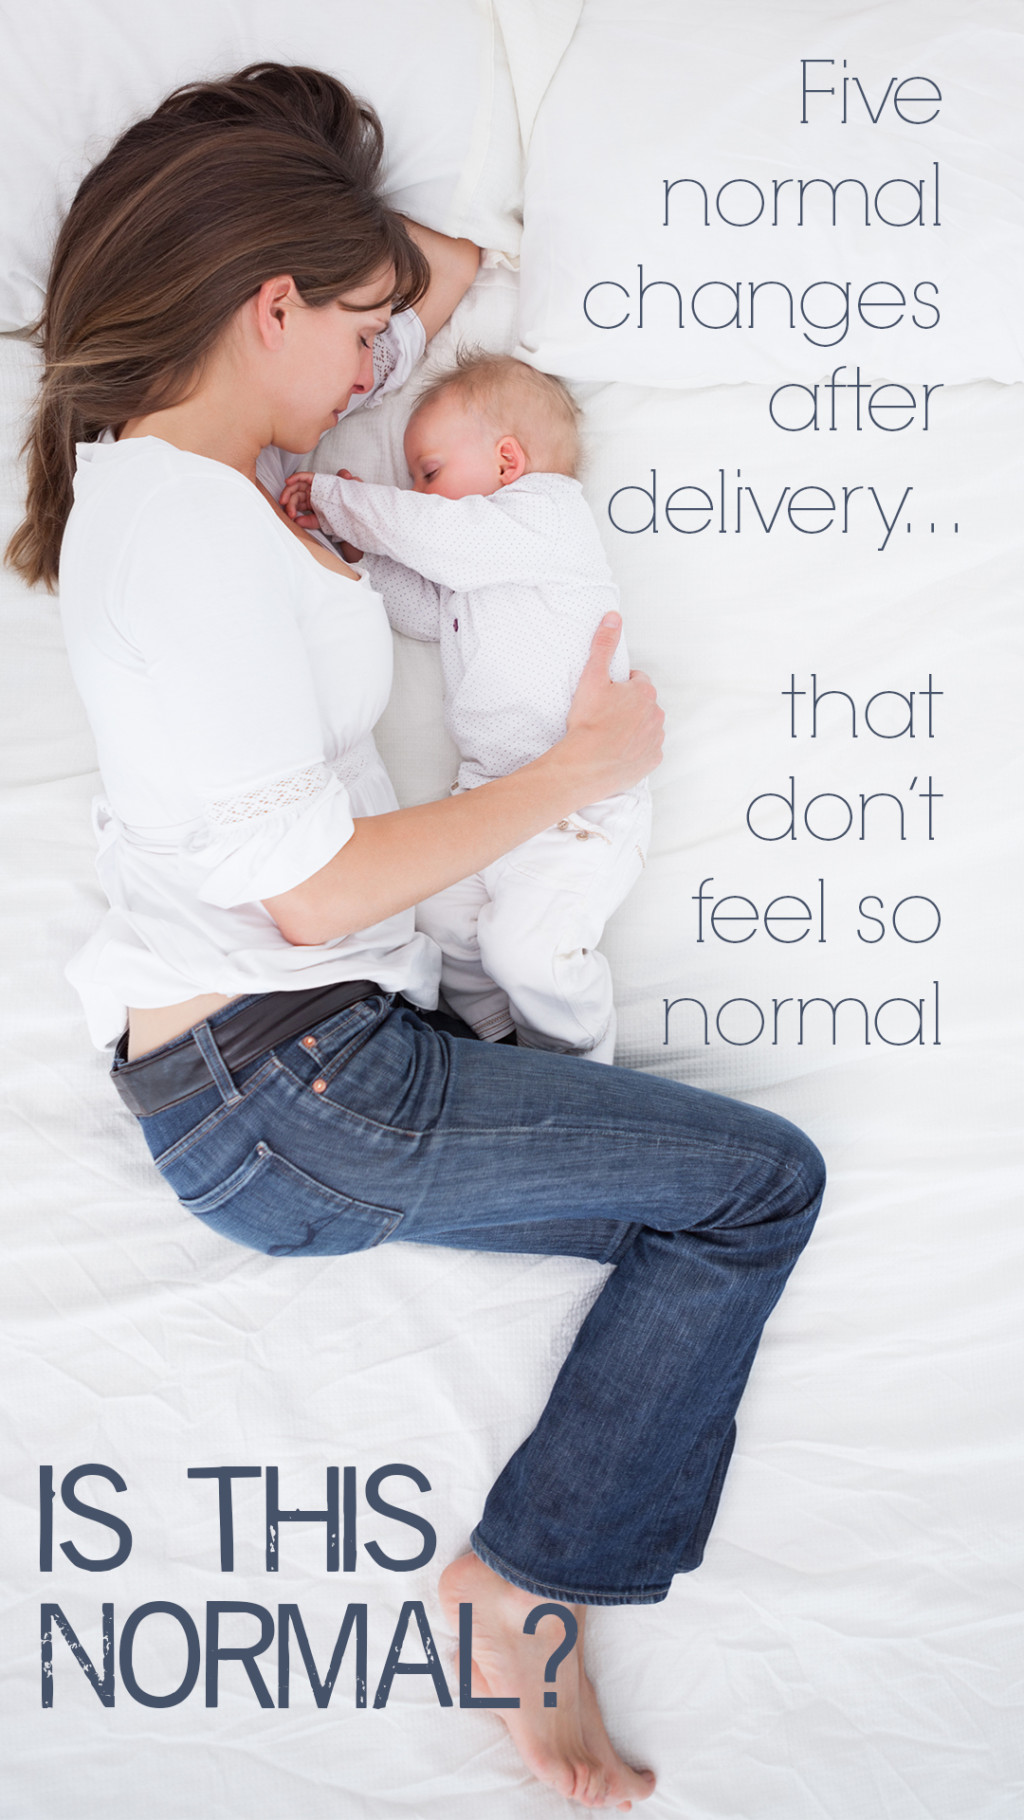 Here are five normal changes that occur postpartum that may not feel so normal.